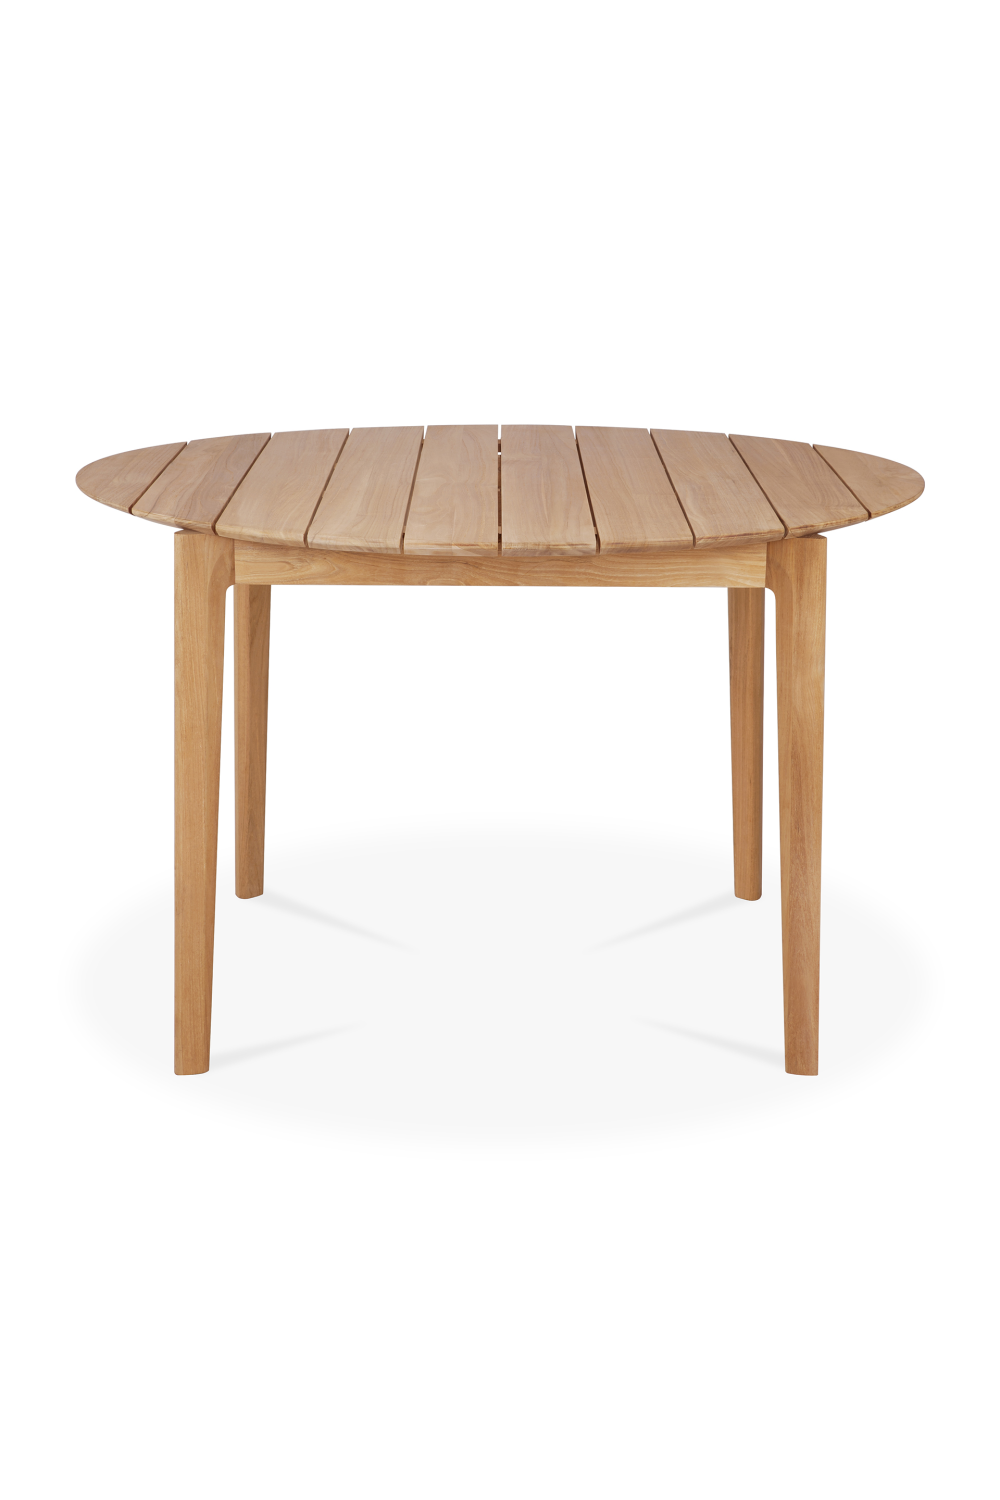 Image of Round Teak Outdoor Dining Table | Ethnicraft Bok